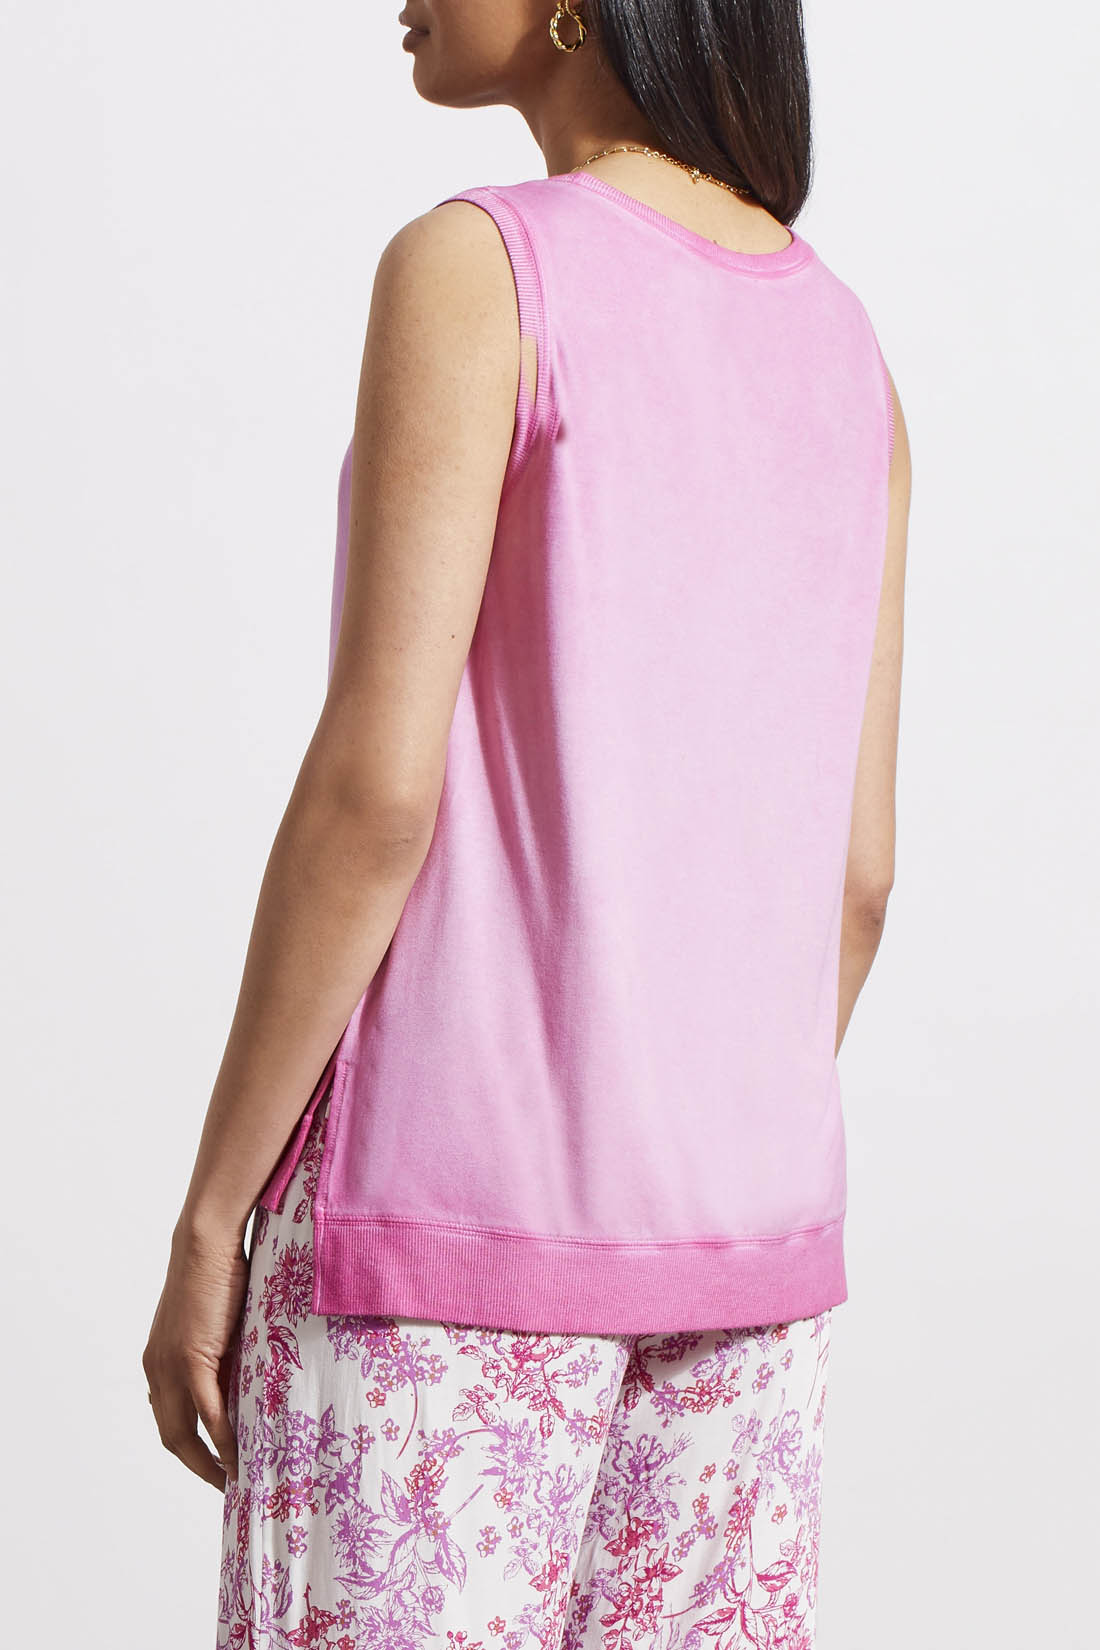 HIGH LOW TANK TOP W/ SPECIAL WASH EFFECT-HI PINK 5358O-4923